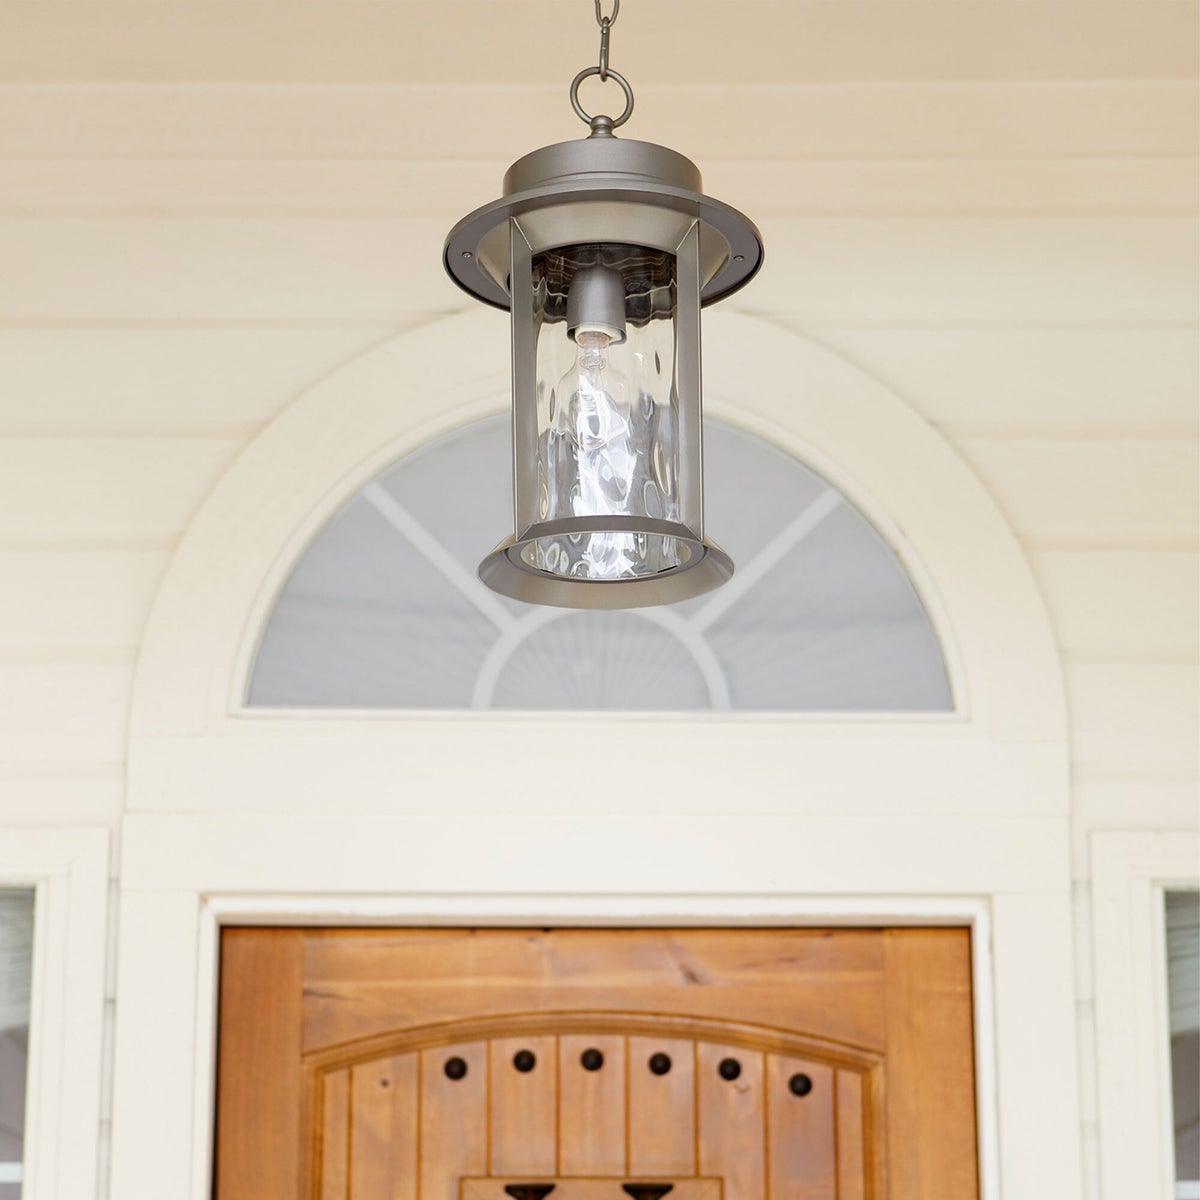 Mid Century Modern Outdoor Hanging Light with hammered glass panes, clean-lined drum silhouette, and durable metal construction. Casts a bright light on your outdoor space.